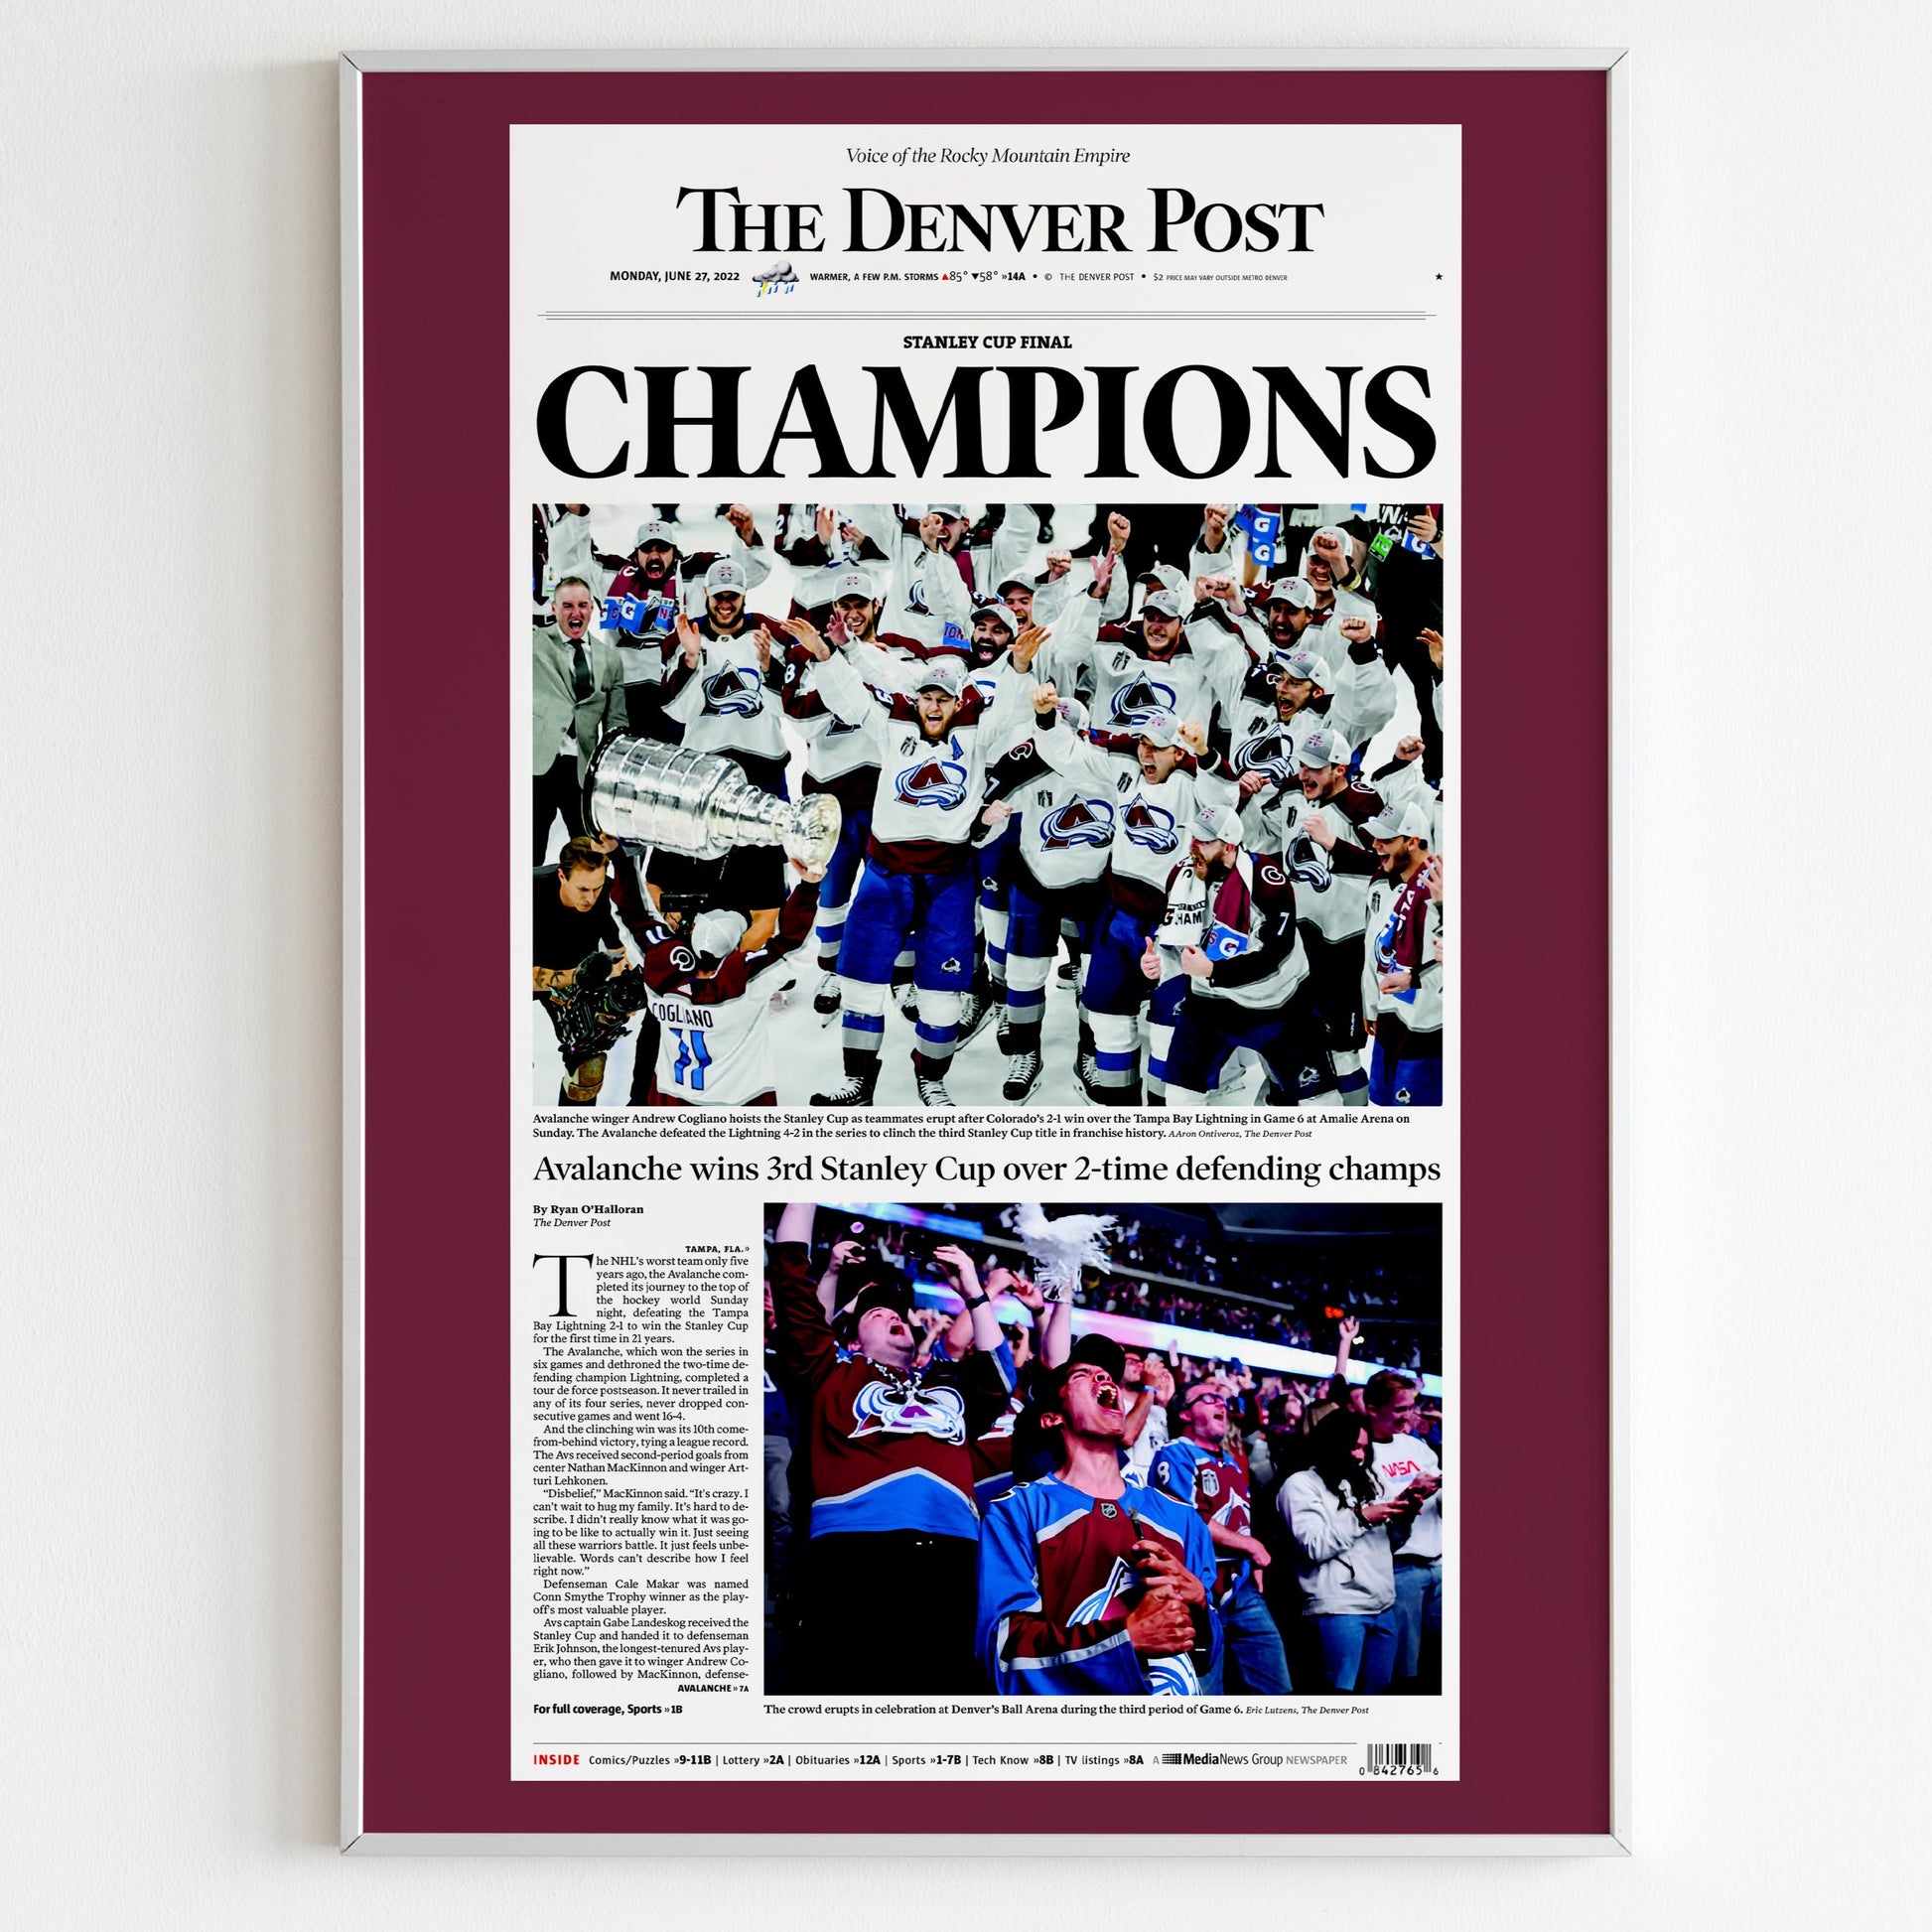 Colorado Avalanche 2022 NHL Stanley Cup Champions Front Cover The Denver Post Poster, Hockey Team Magazine Print, Newspaper Front Page